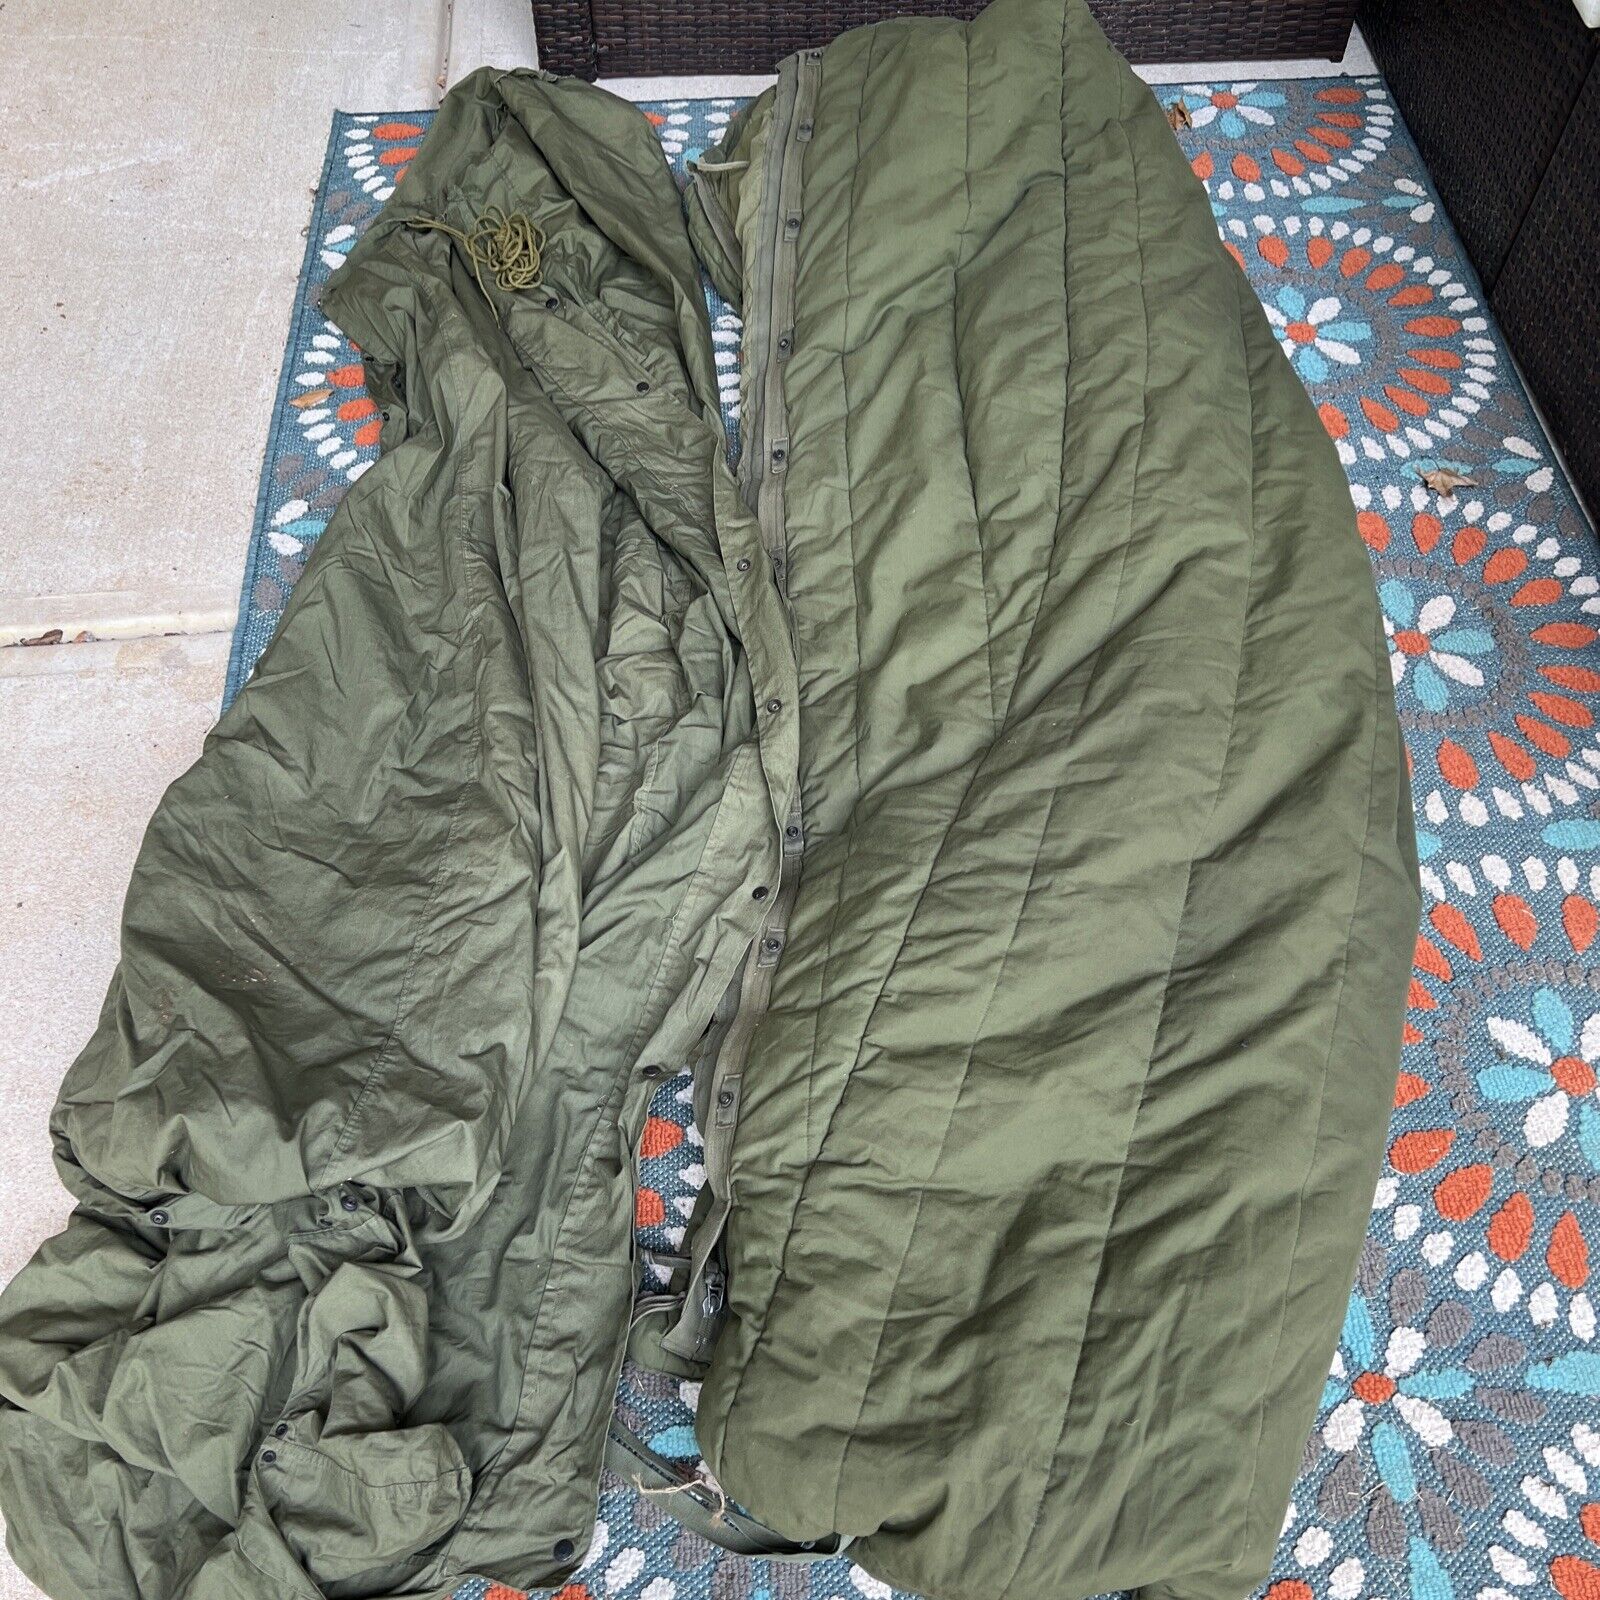 Military Sleeping Bag Intermediate Cold Weather, DLA100-79C-3095 1952/ + Cover